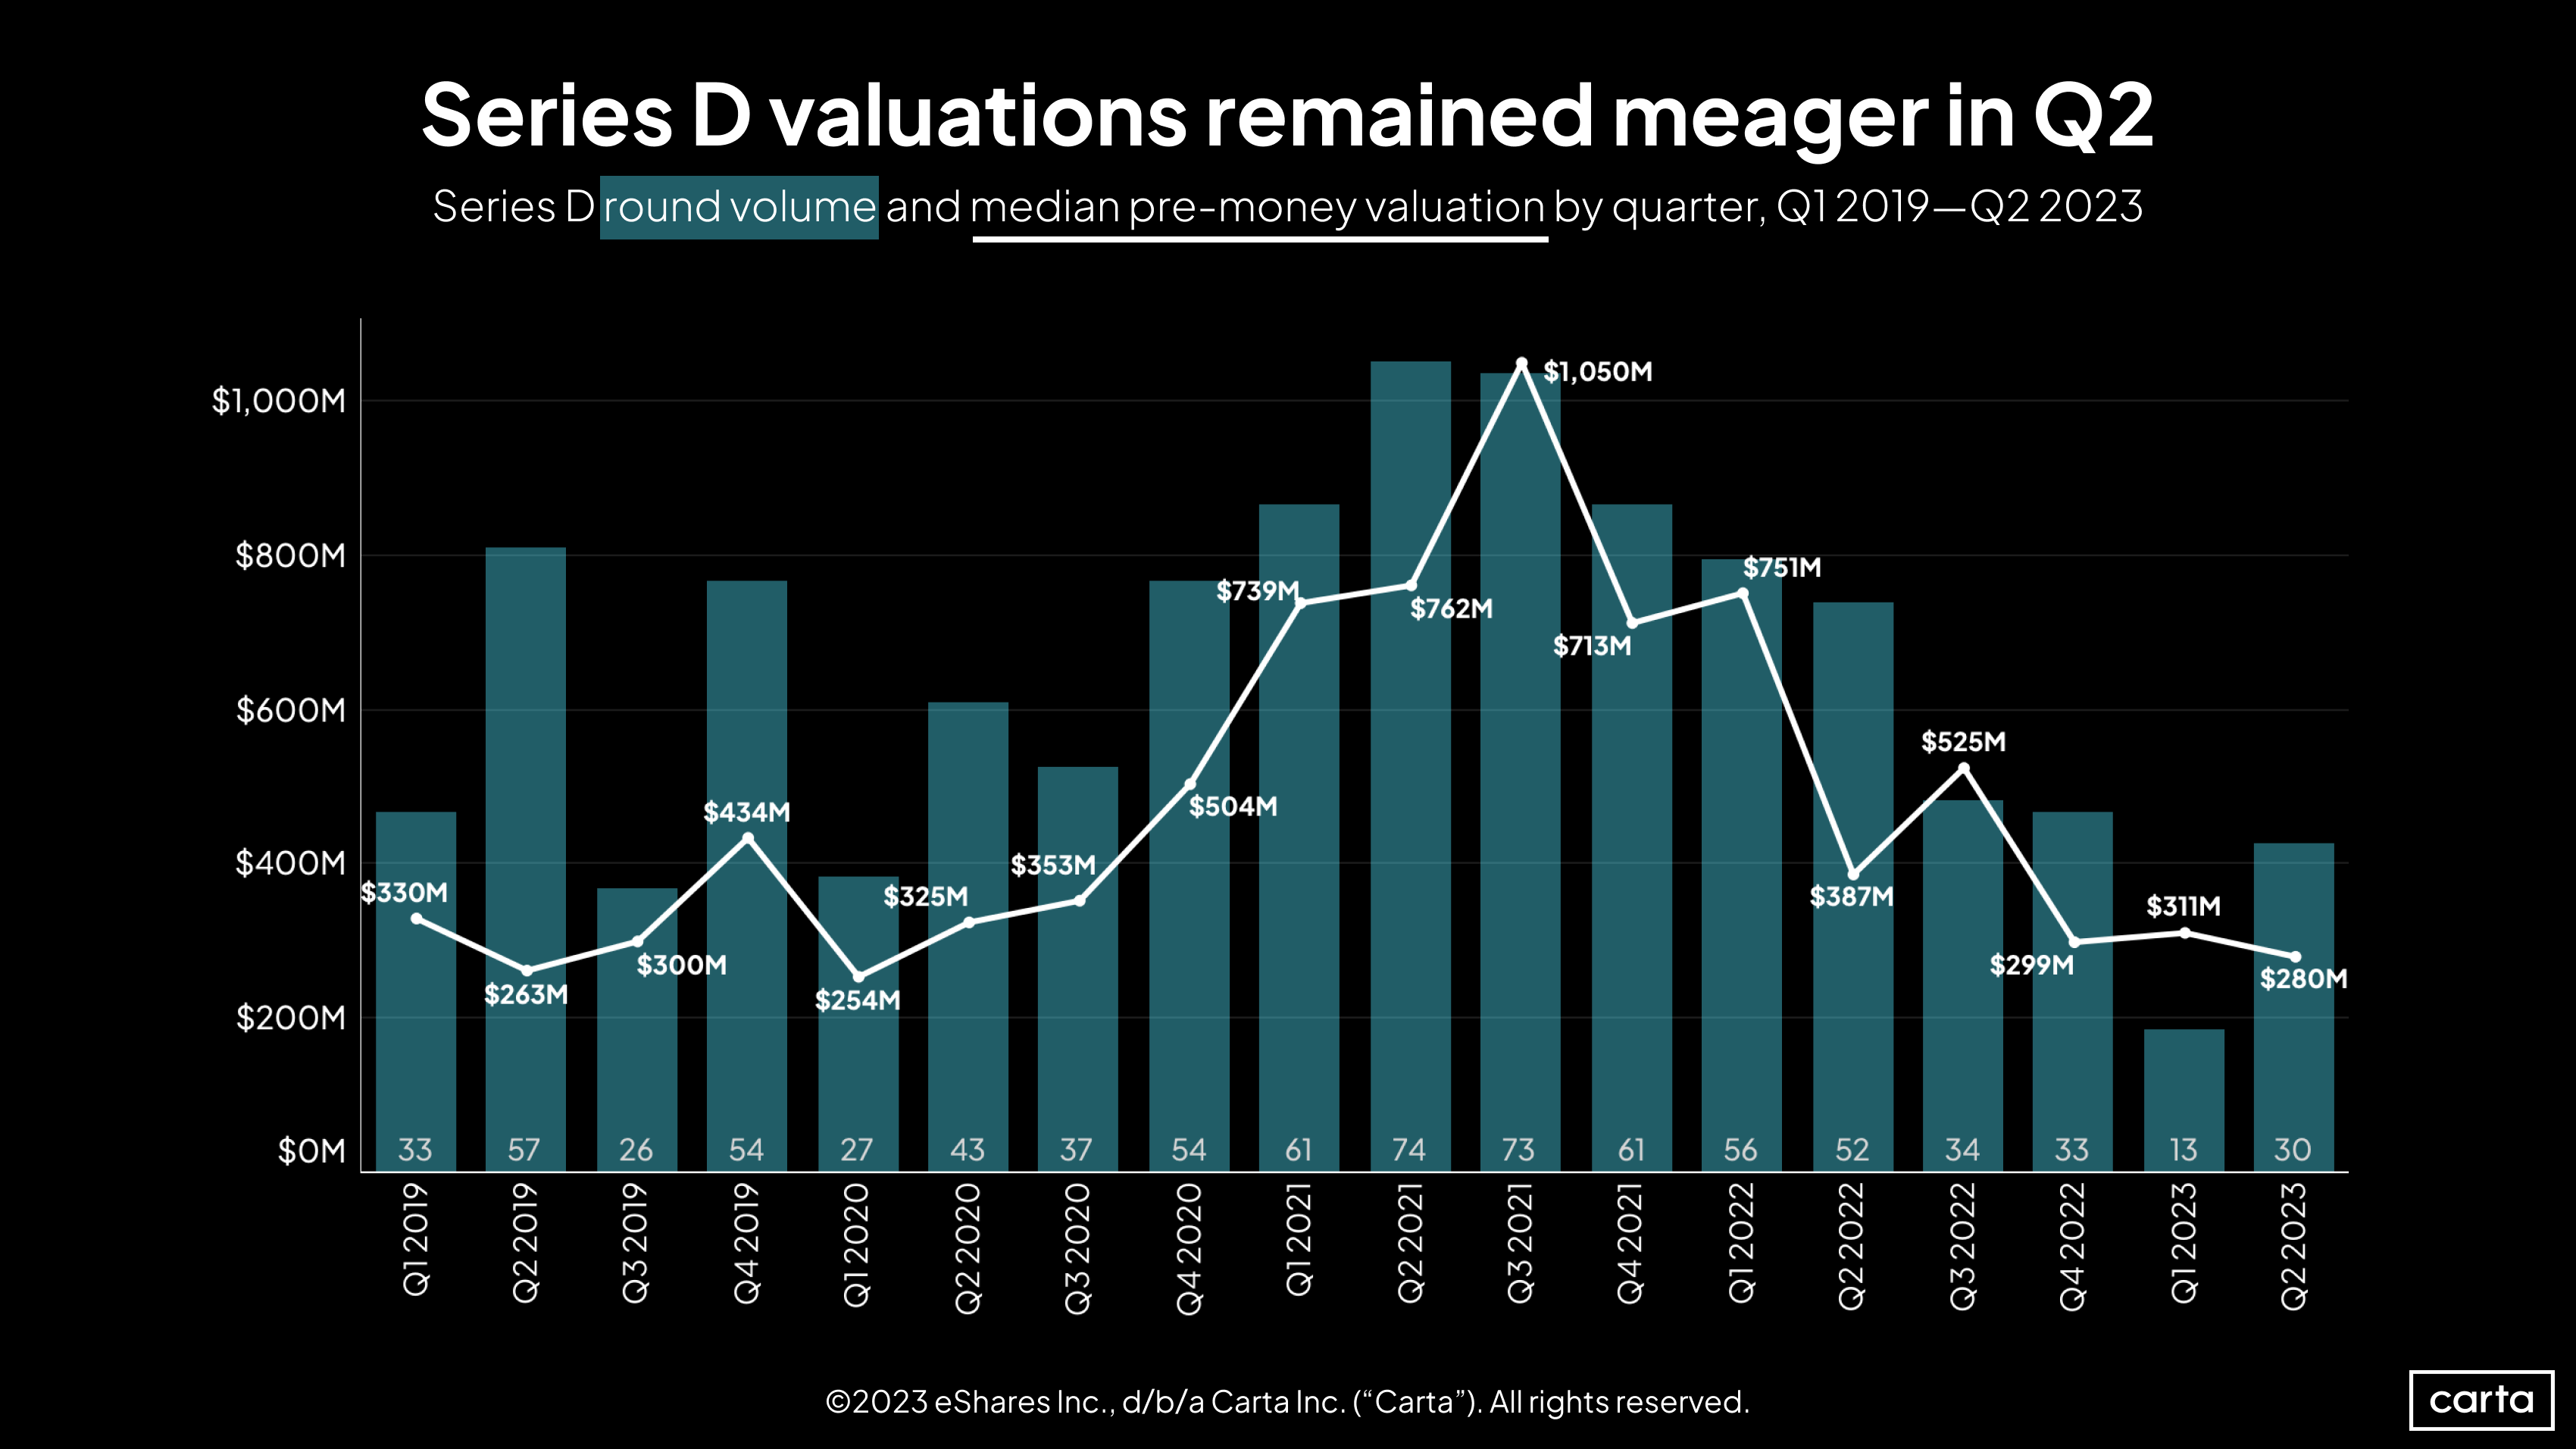 Series D round volume and median pre-money valuation by quarter, Q1 2019 - Q2 2023